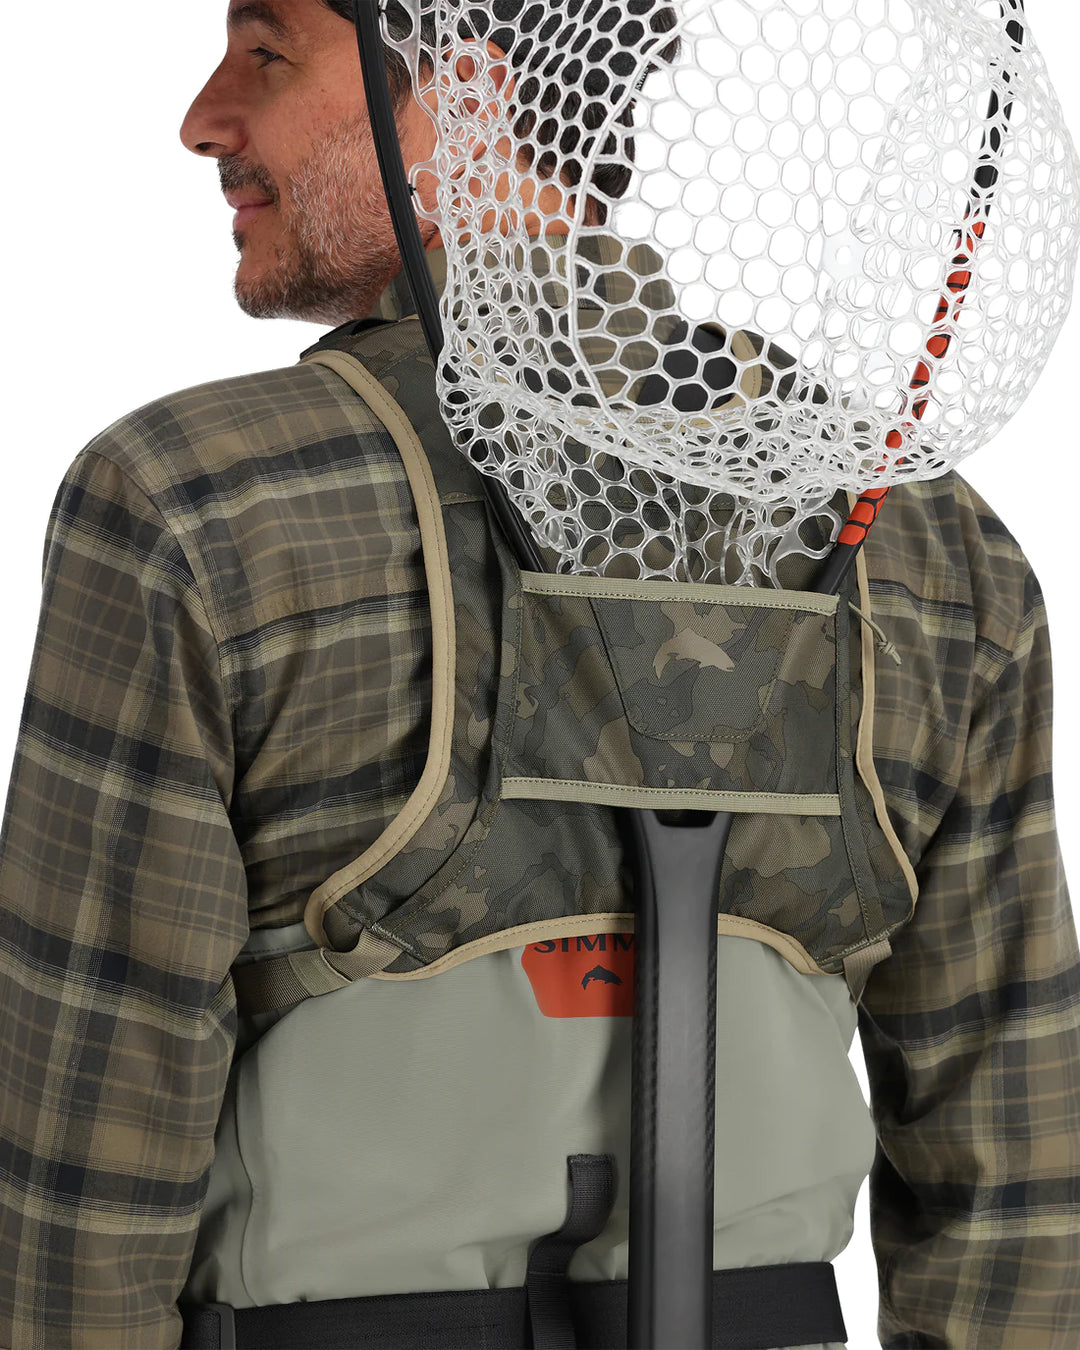 Simms Tributary Hybrid Chest Pack – The Northern Angler Fly Shop